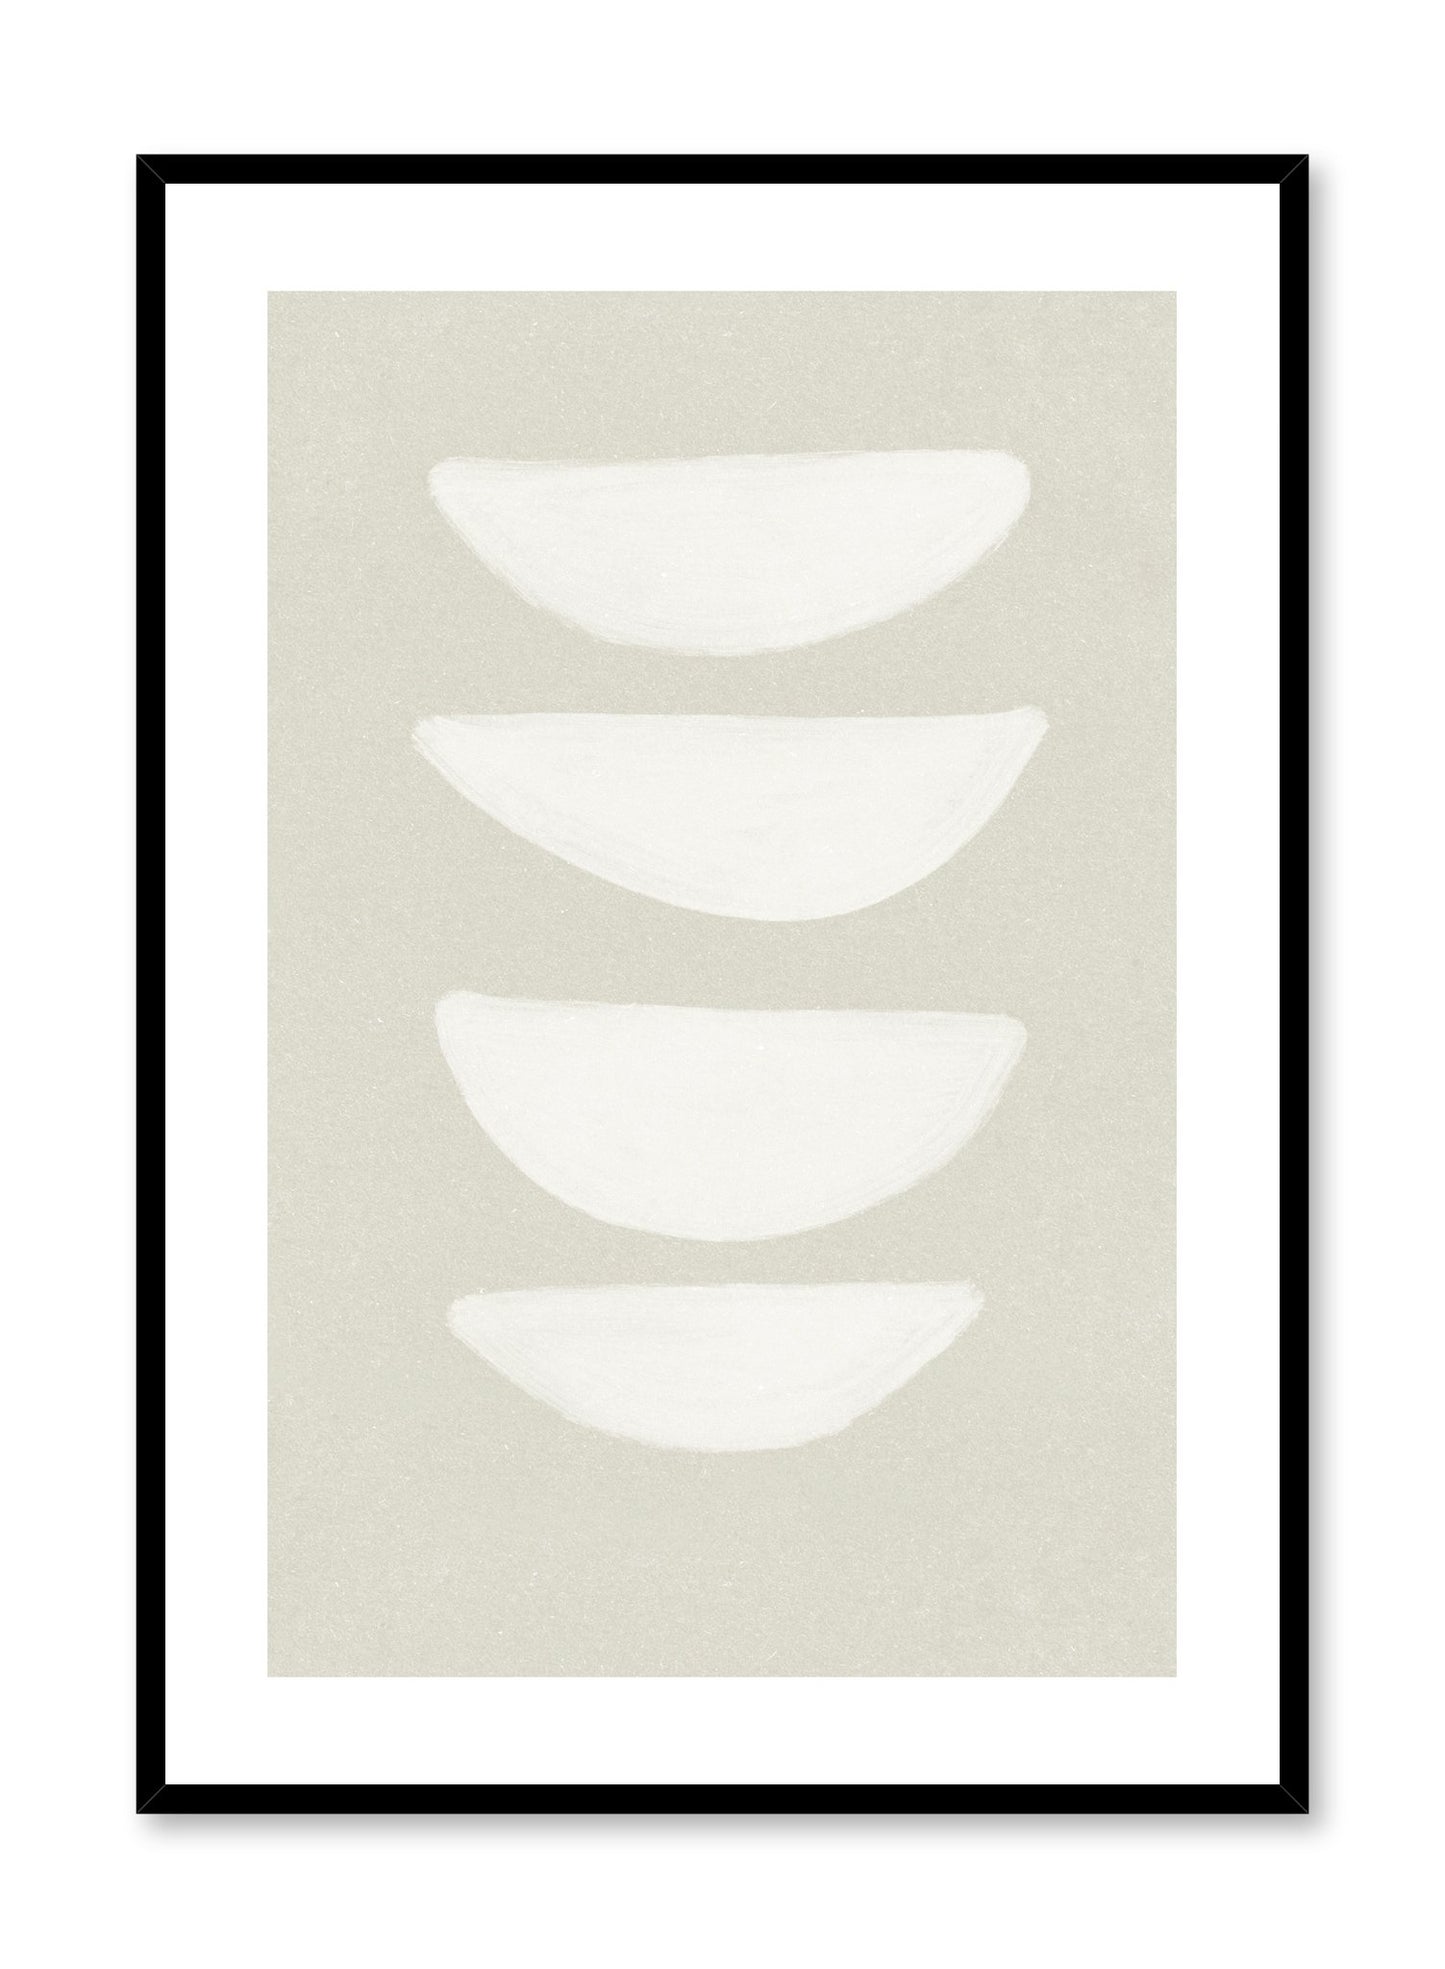 Modern abstract illustration poster by Opposite Wall with stacked bowl shapes on beige by Toffie Affichiste